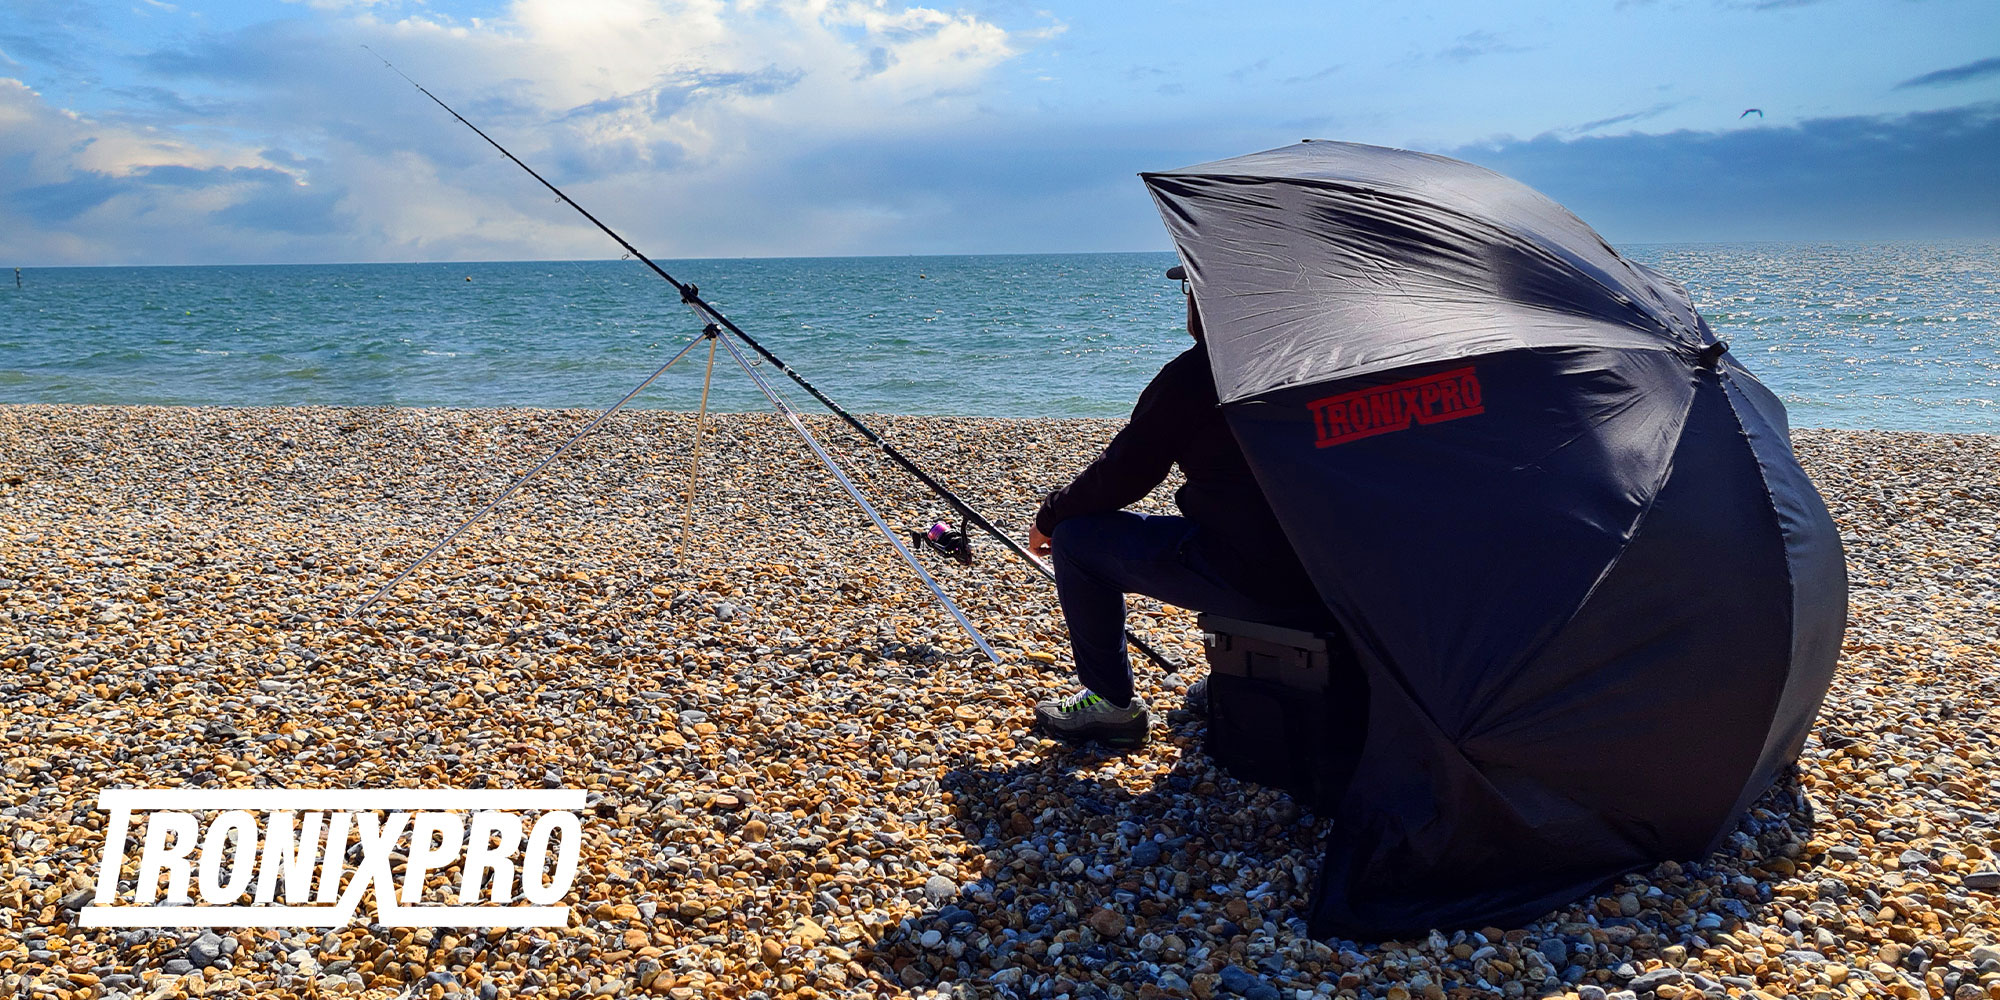 Tronixpro, Premium, affordable sea fishing tackle for anglers